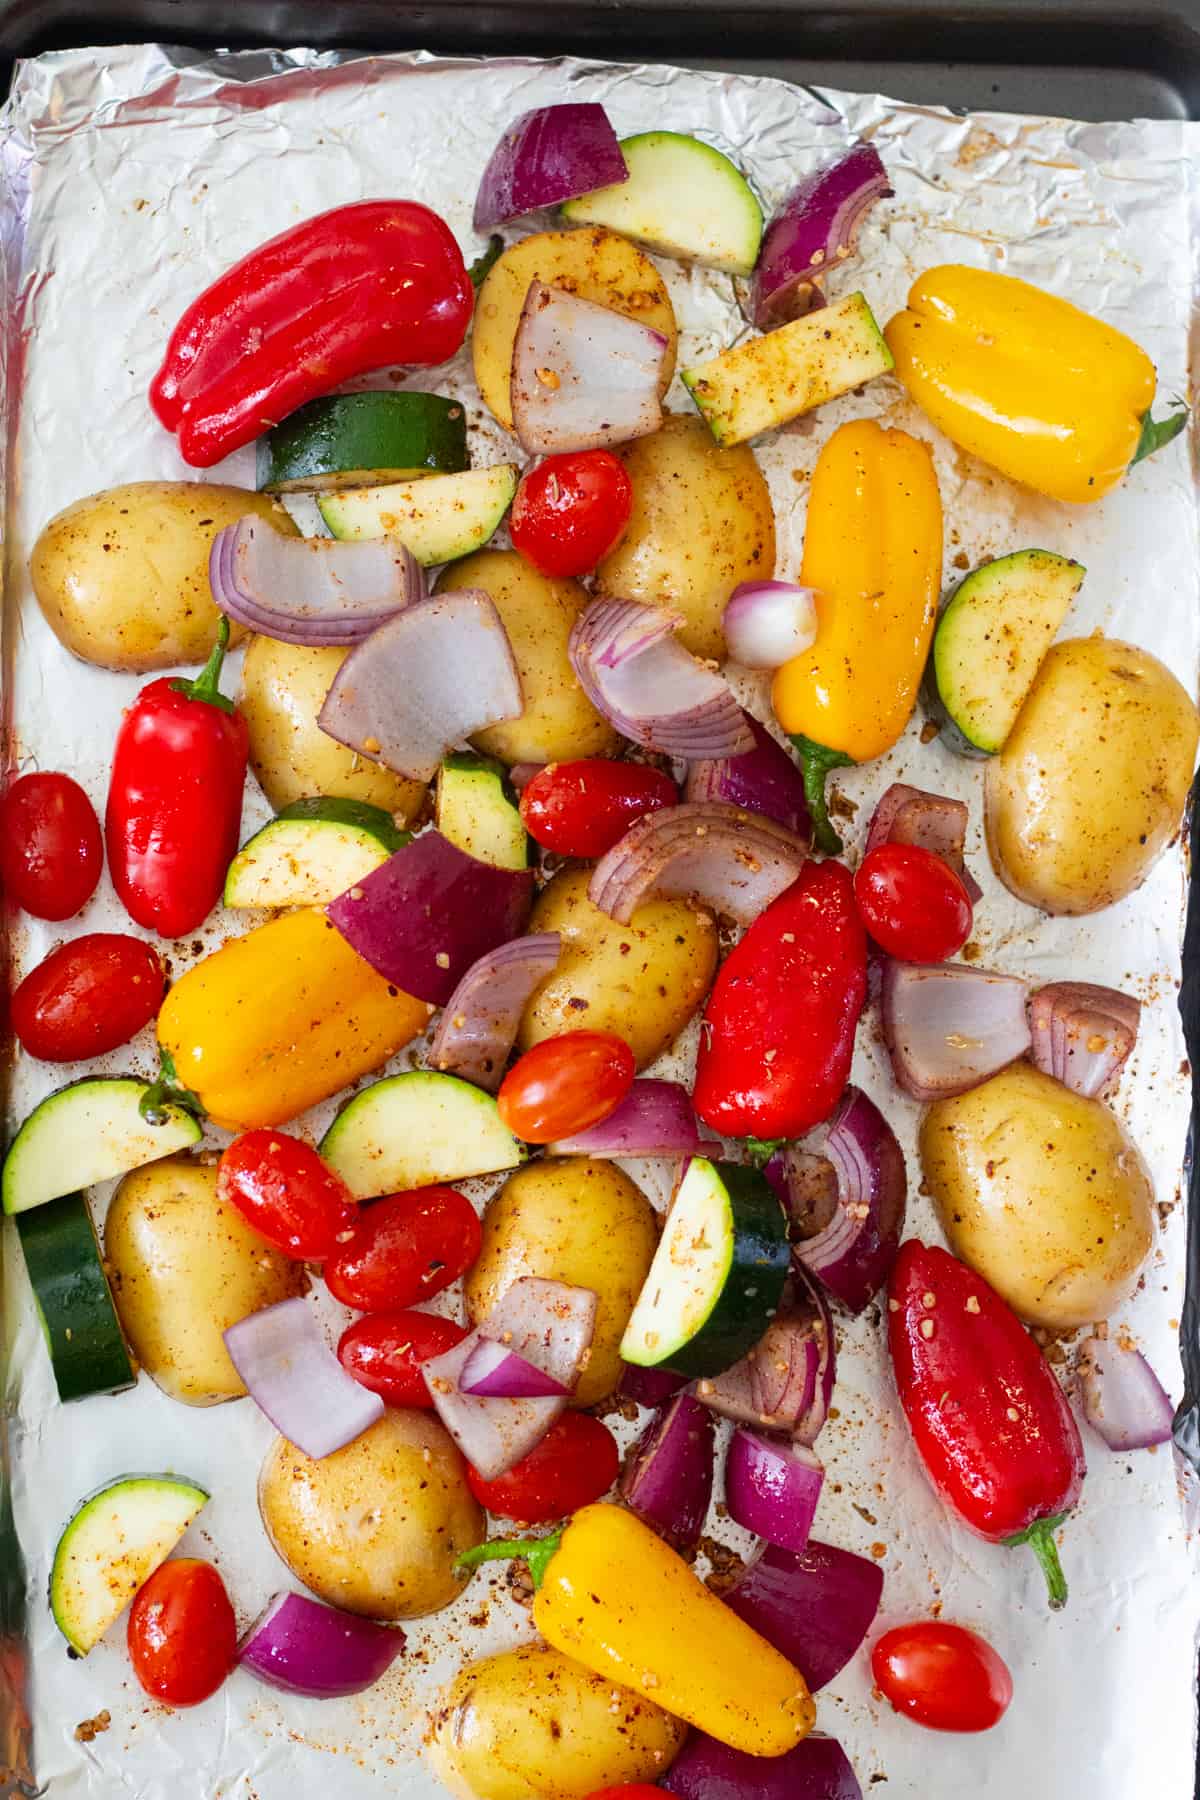 Place all the vegetables on a baking sheet and roast for 25 minutes. 